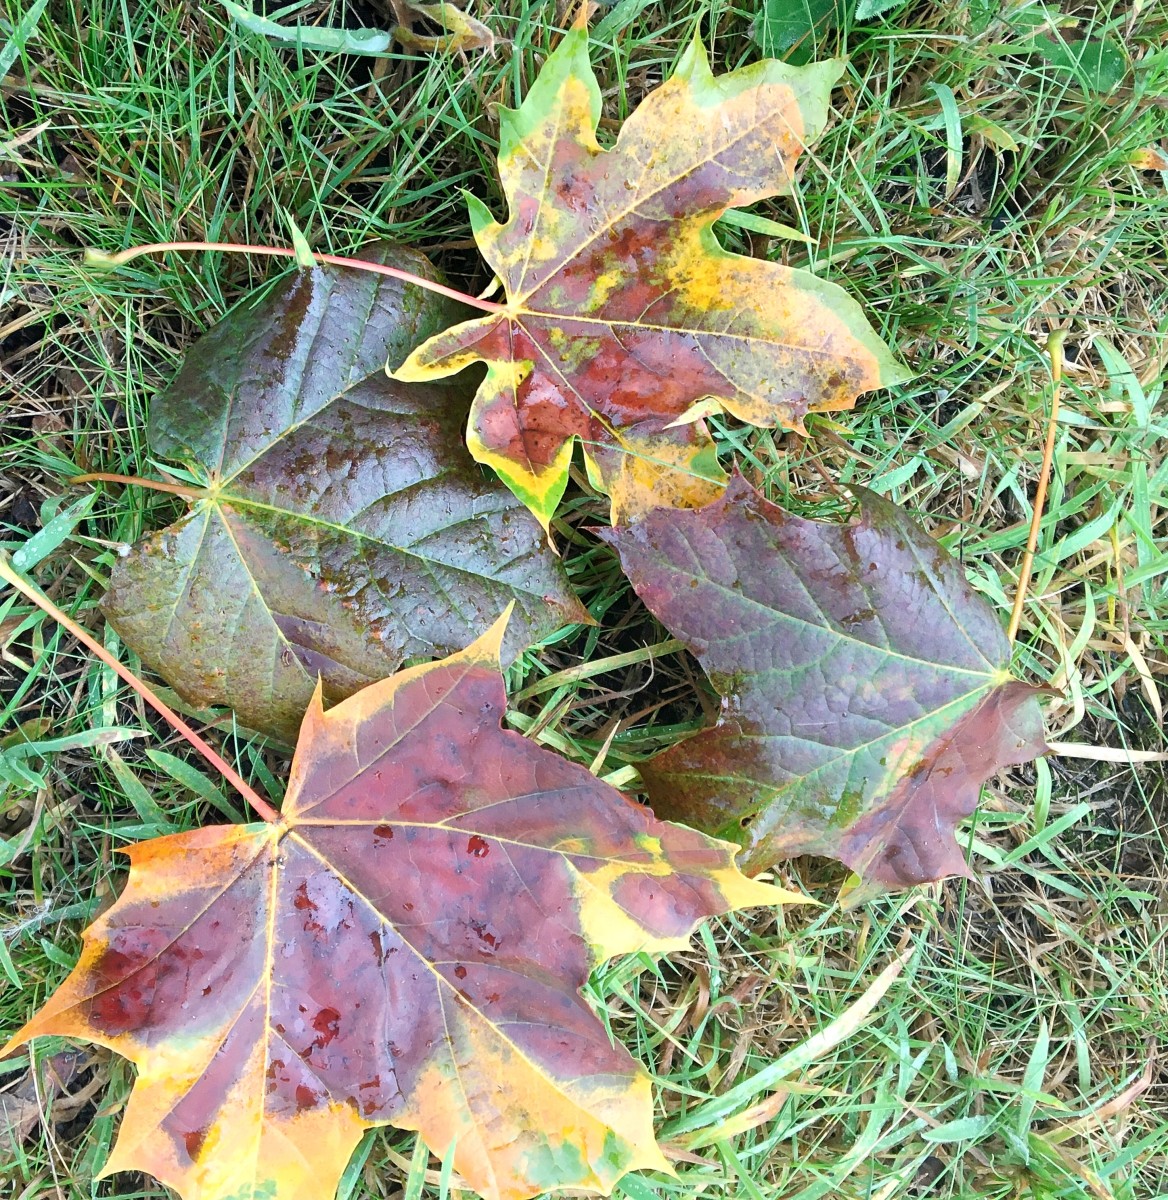 More leaves dropped by the maple tree